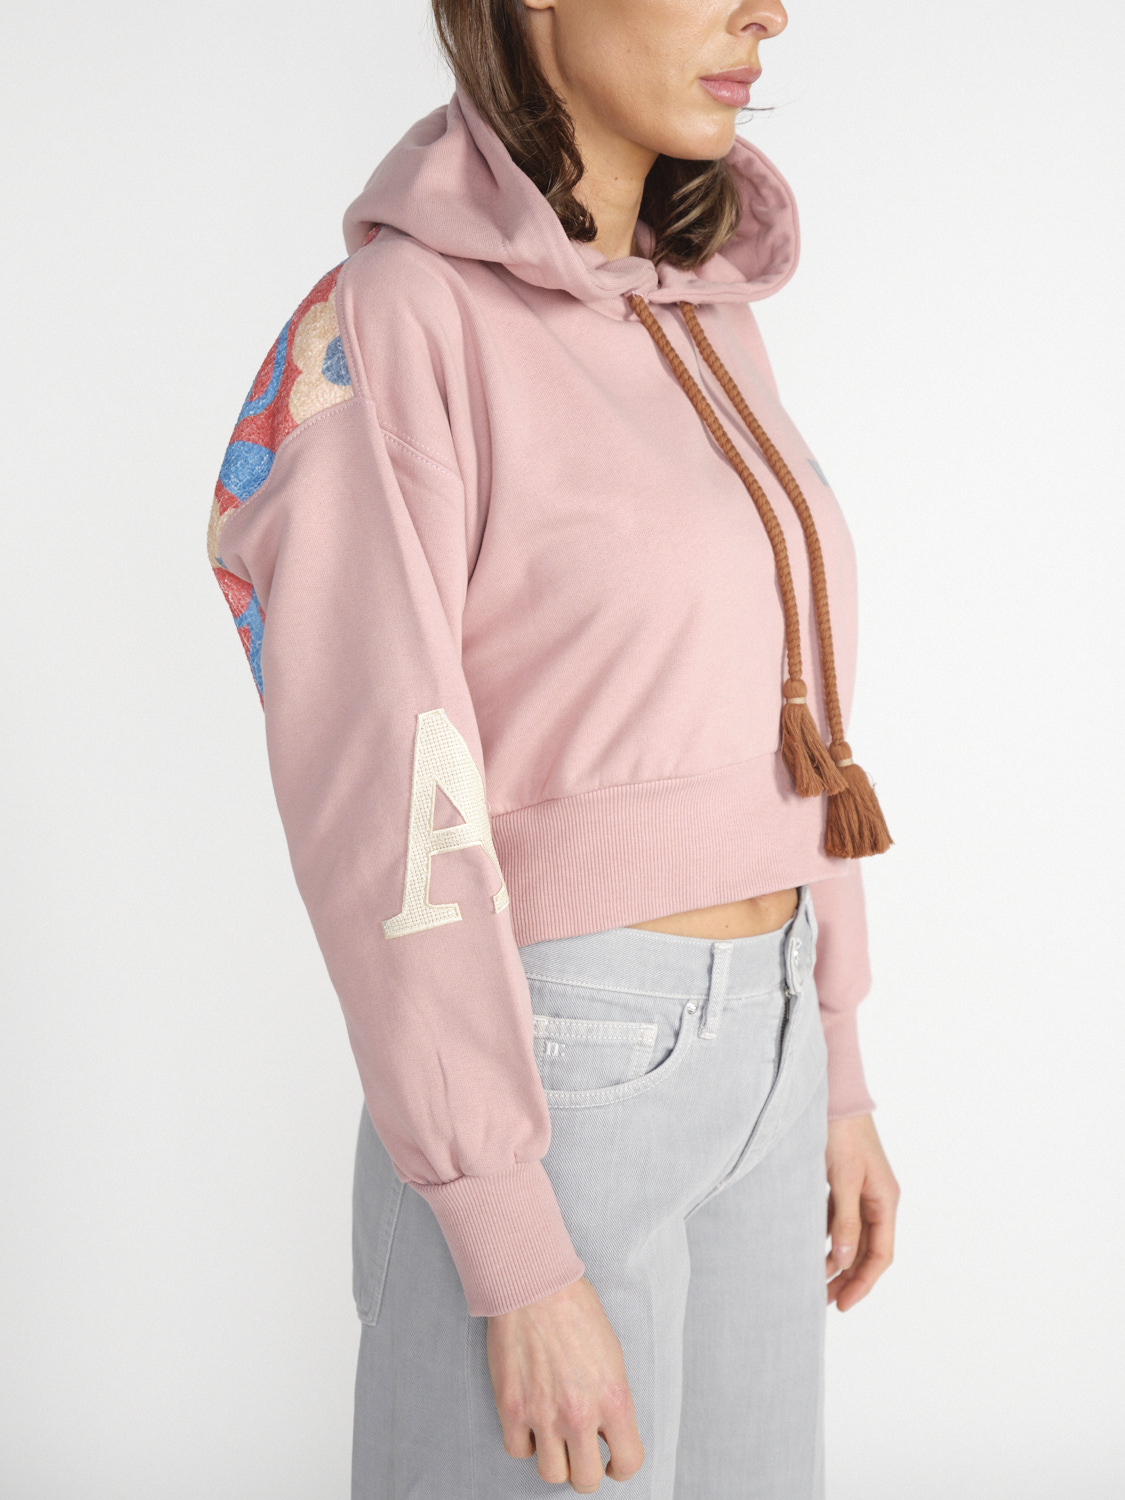 Al Ain Ahcx - Cropped Hoodie mit Muster  rosa S/M